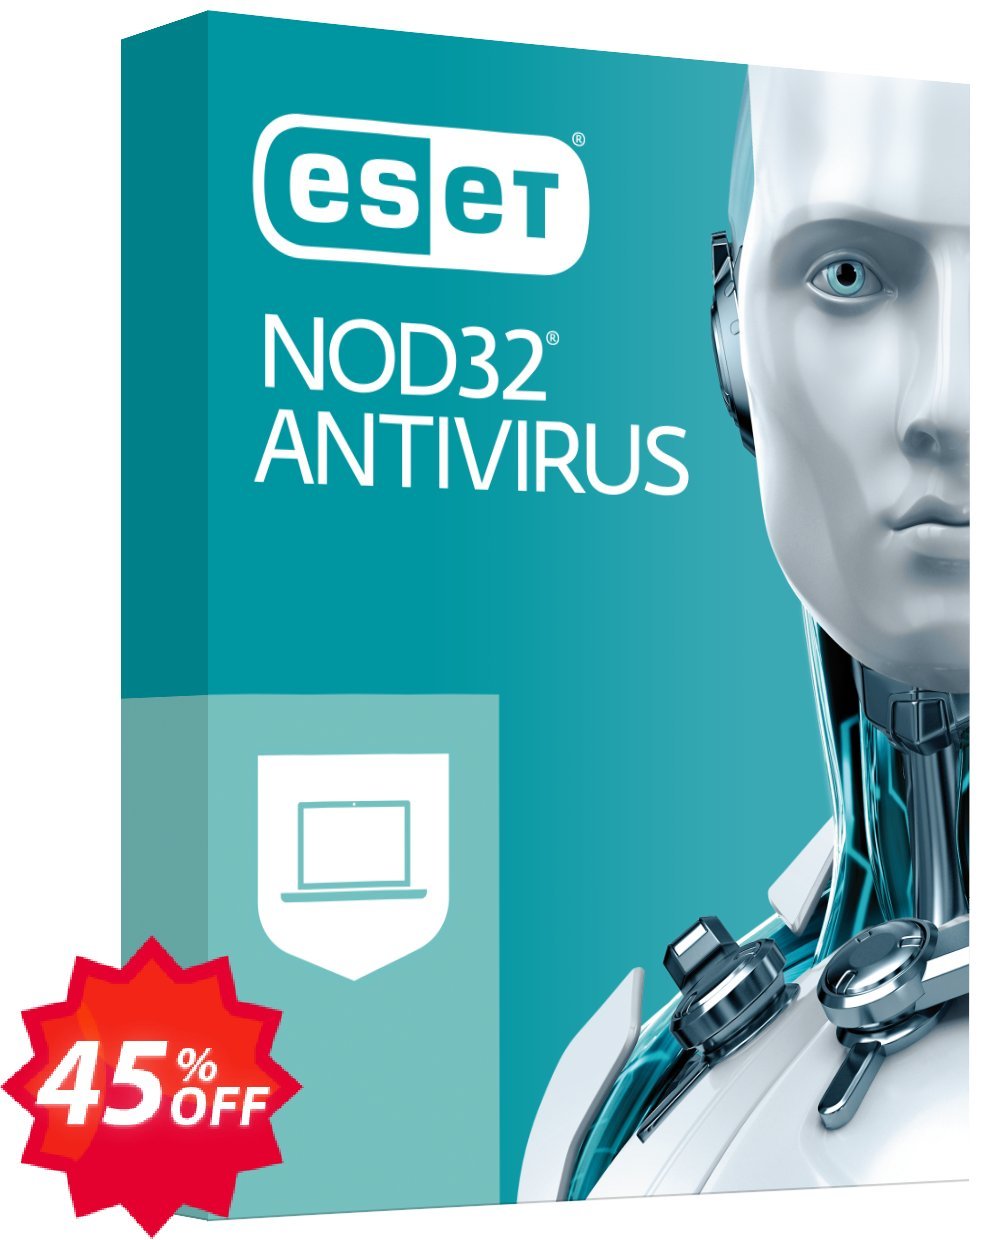 ESET NOD32 Antivirus -  Yearly 2 Devices Coupon code 45% discount 